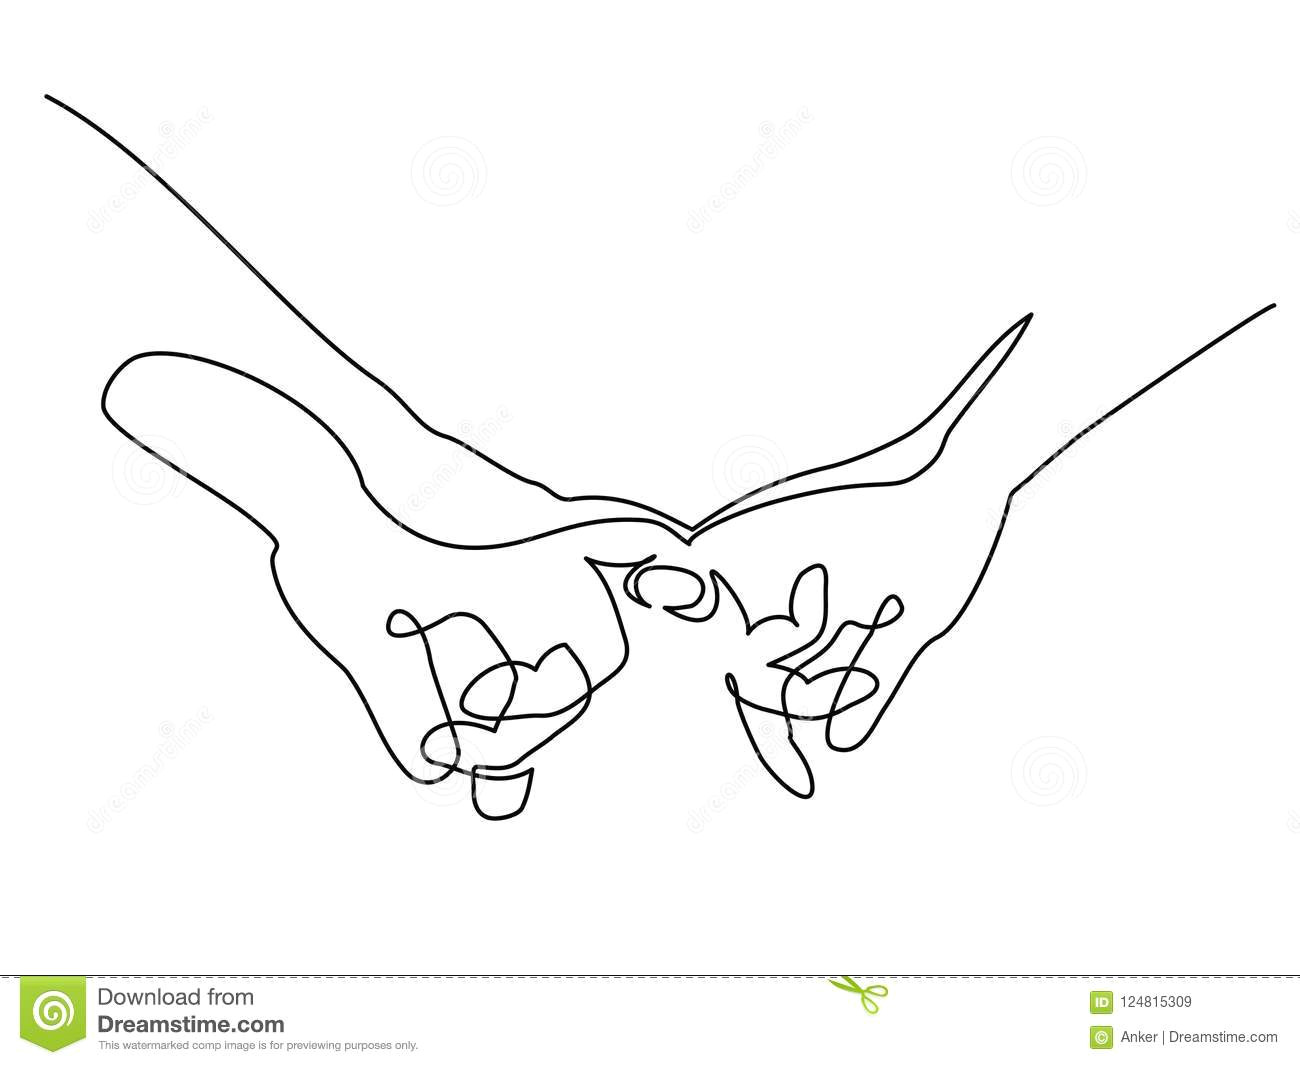 Drawings Of Holding Hands together Hands Woman and Man Holding together with Fingers Stock Vector